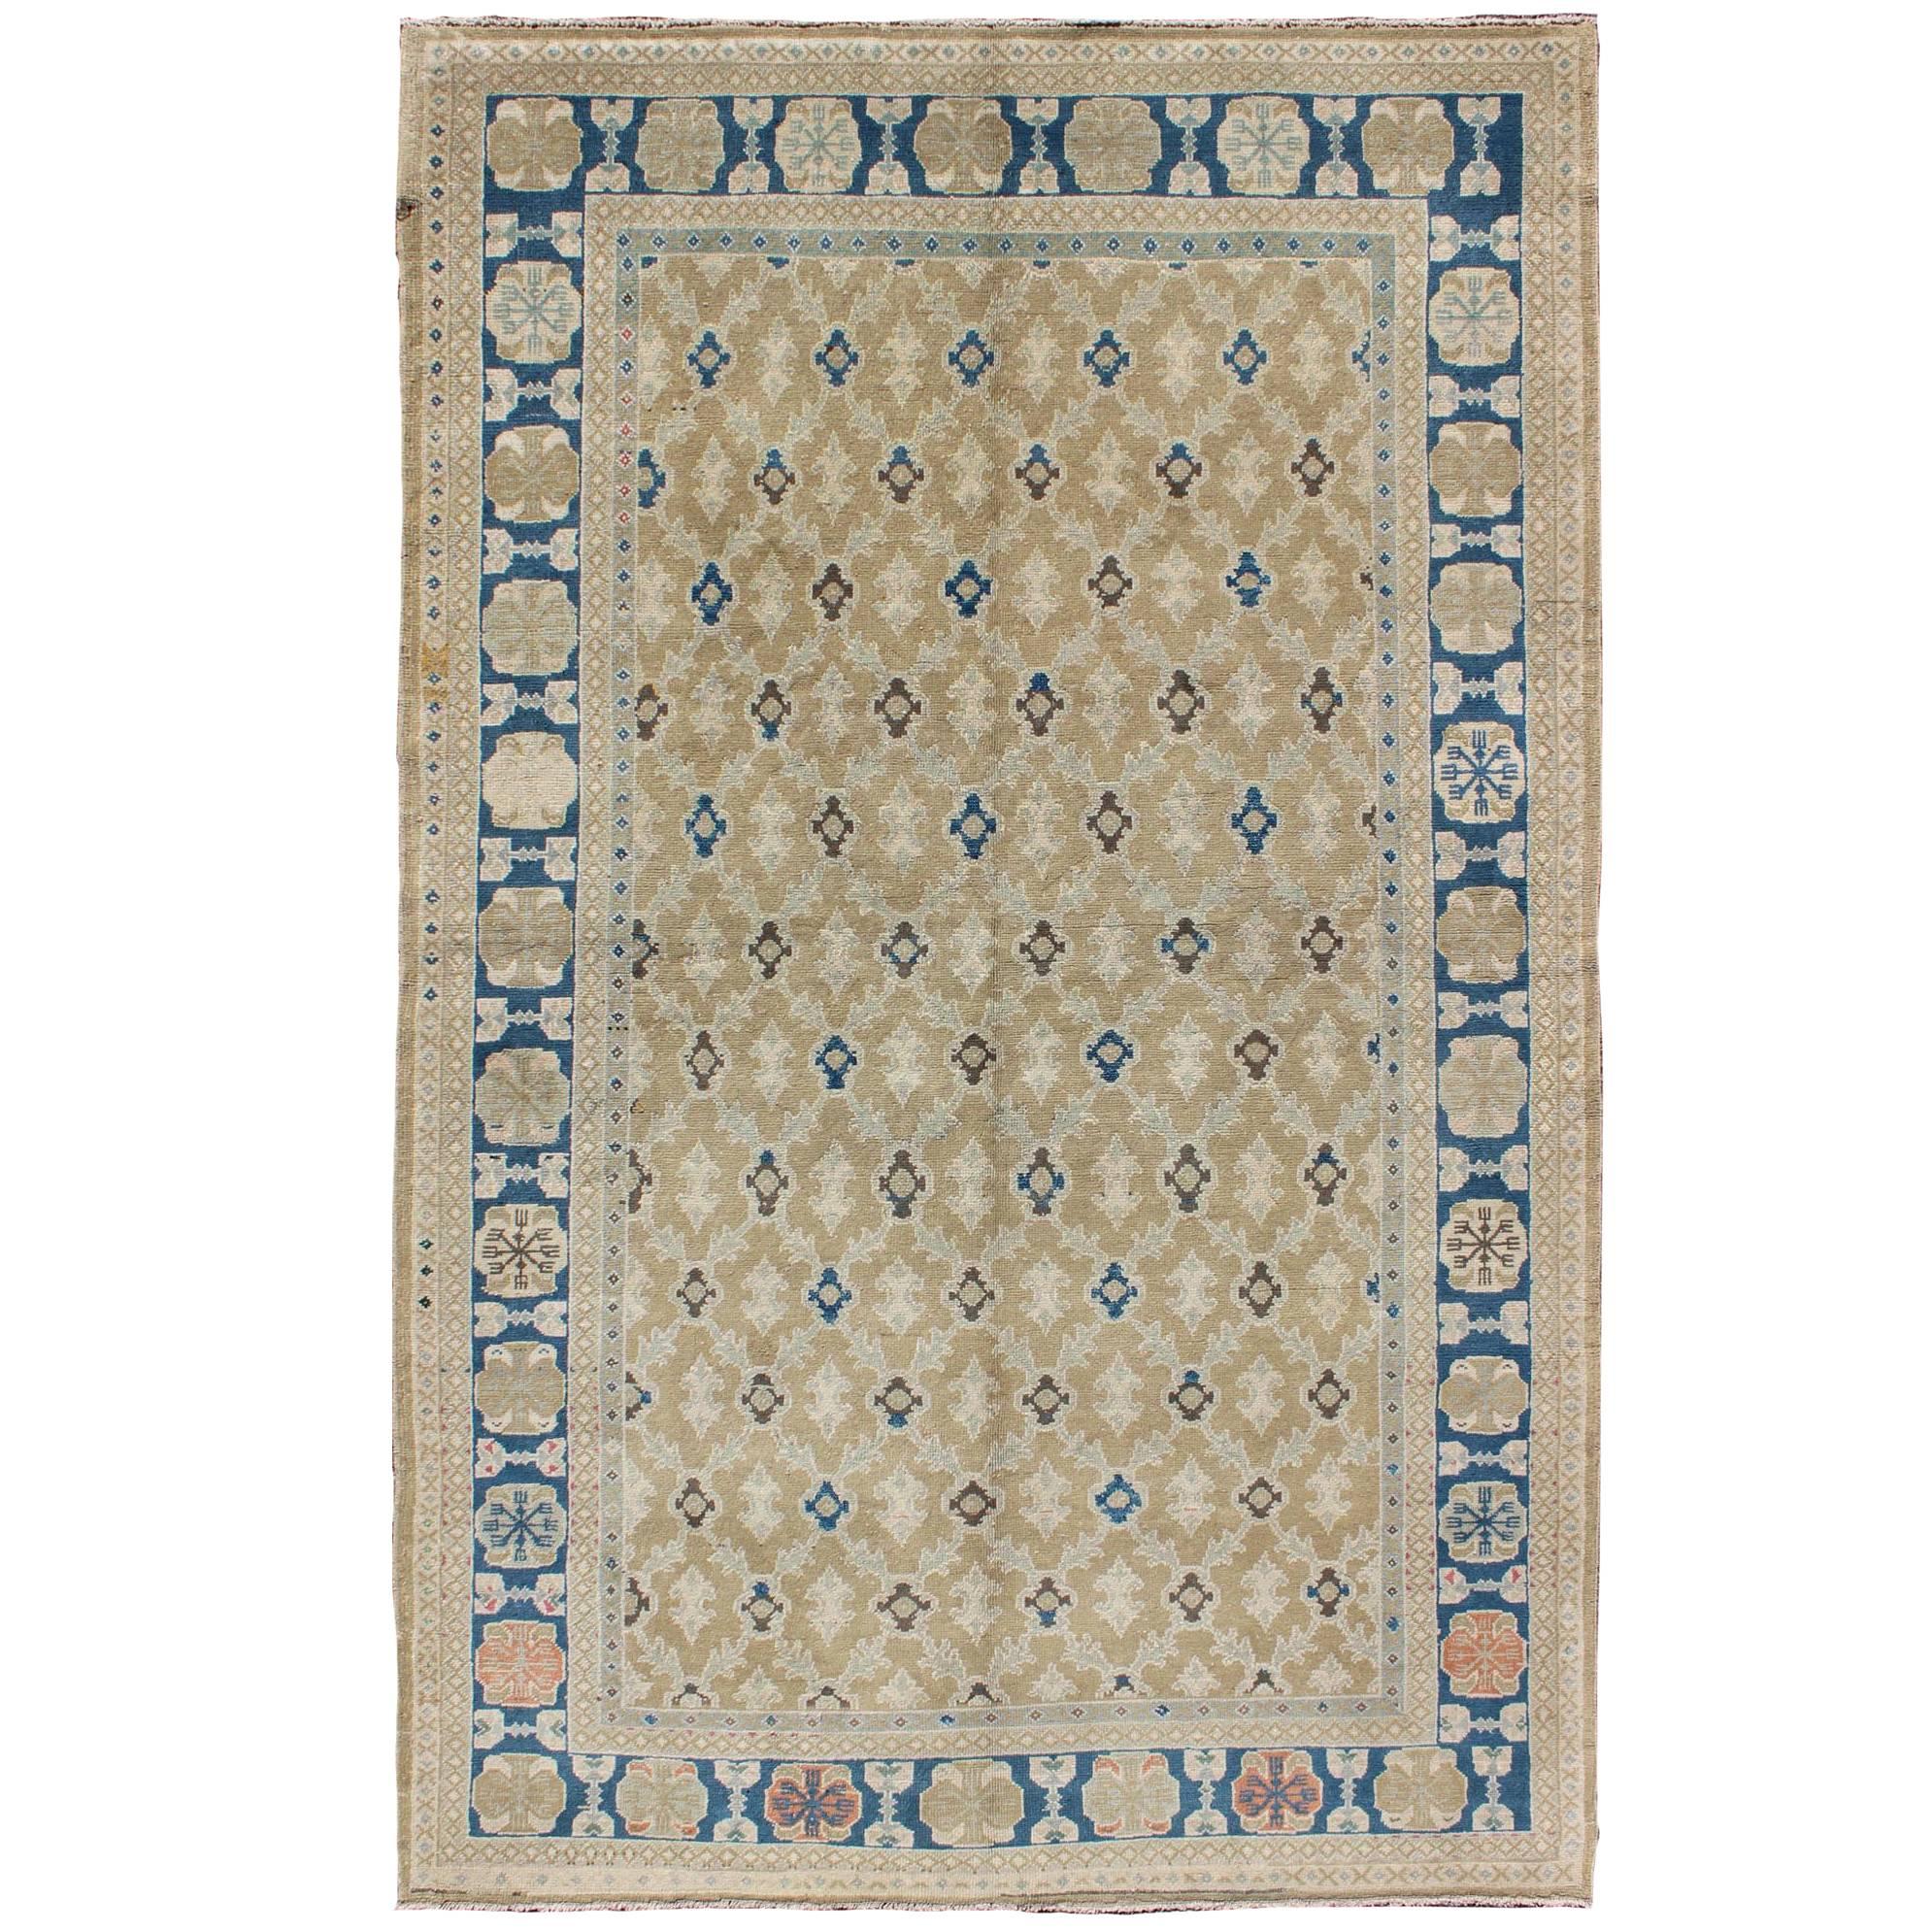 Fine Turkish Sivas Rug in All Over Geometric Design in Tan, Taupe, Blue & Brown